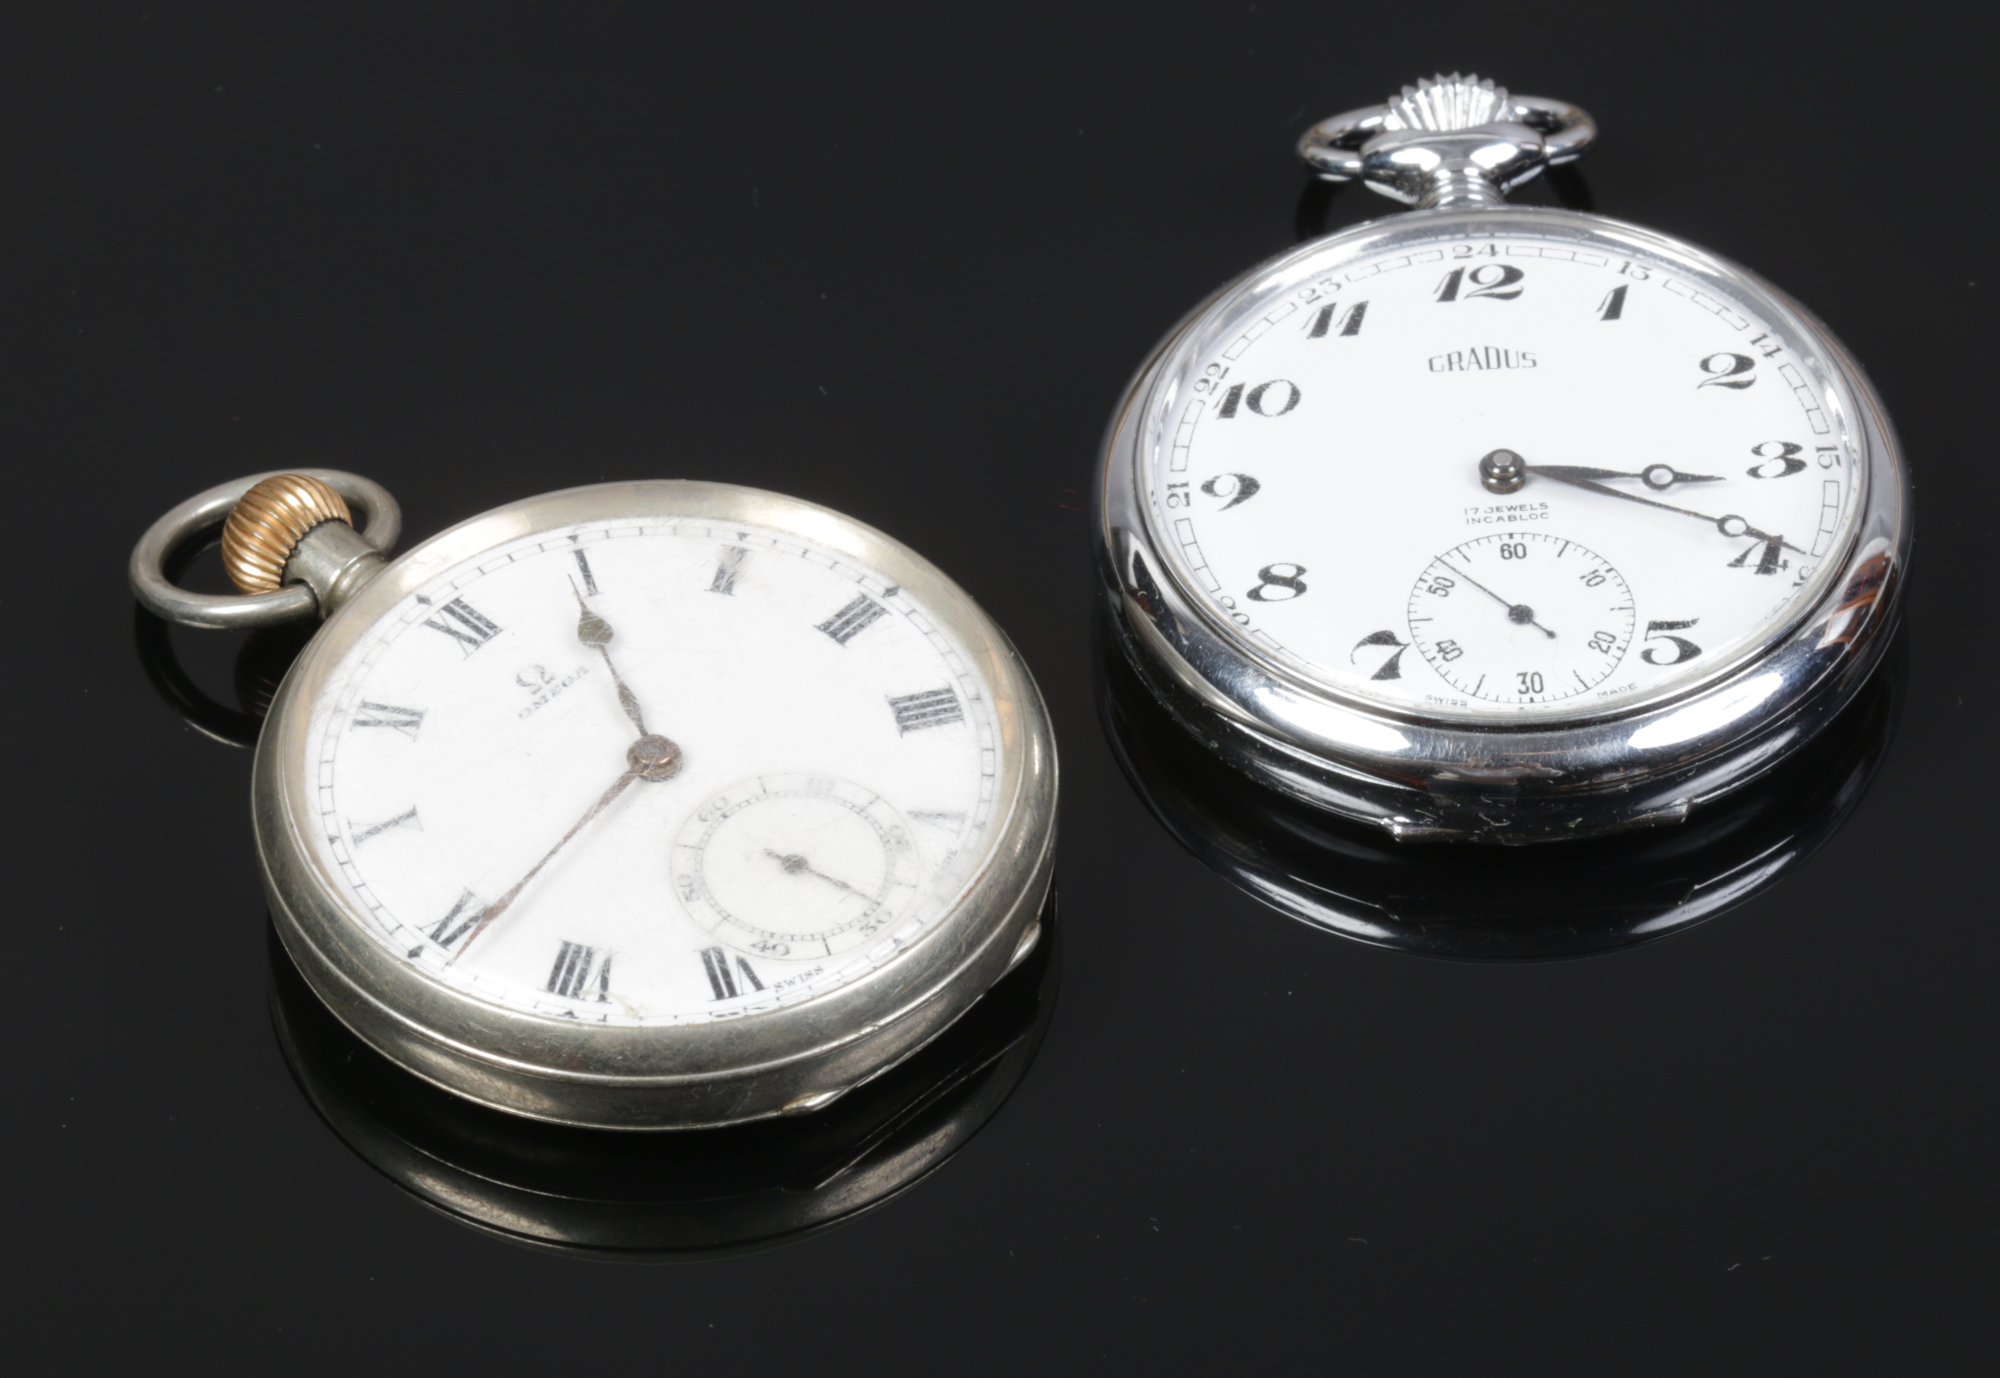 An Omega pocket watch with enamel dial and subsidiary seconds, along with a Gradus pocket watch in